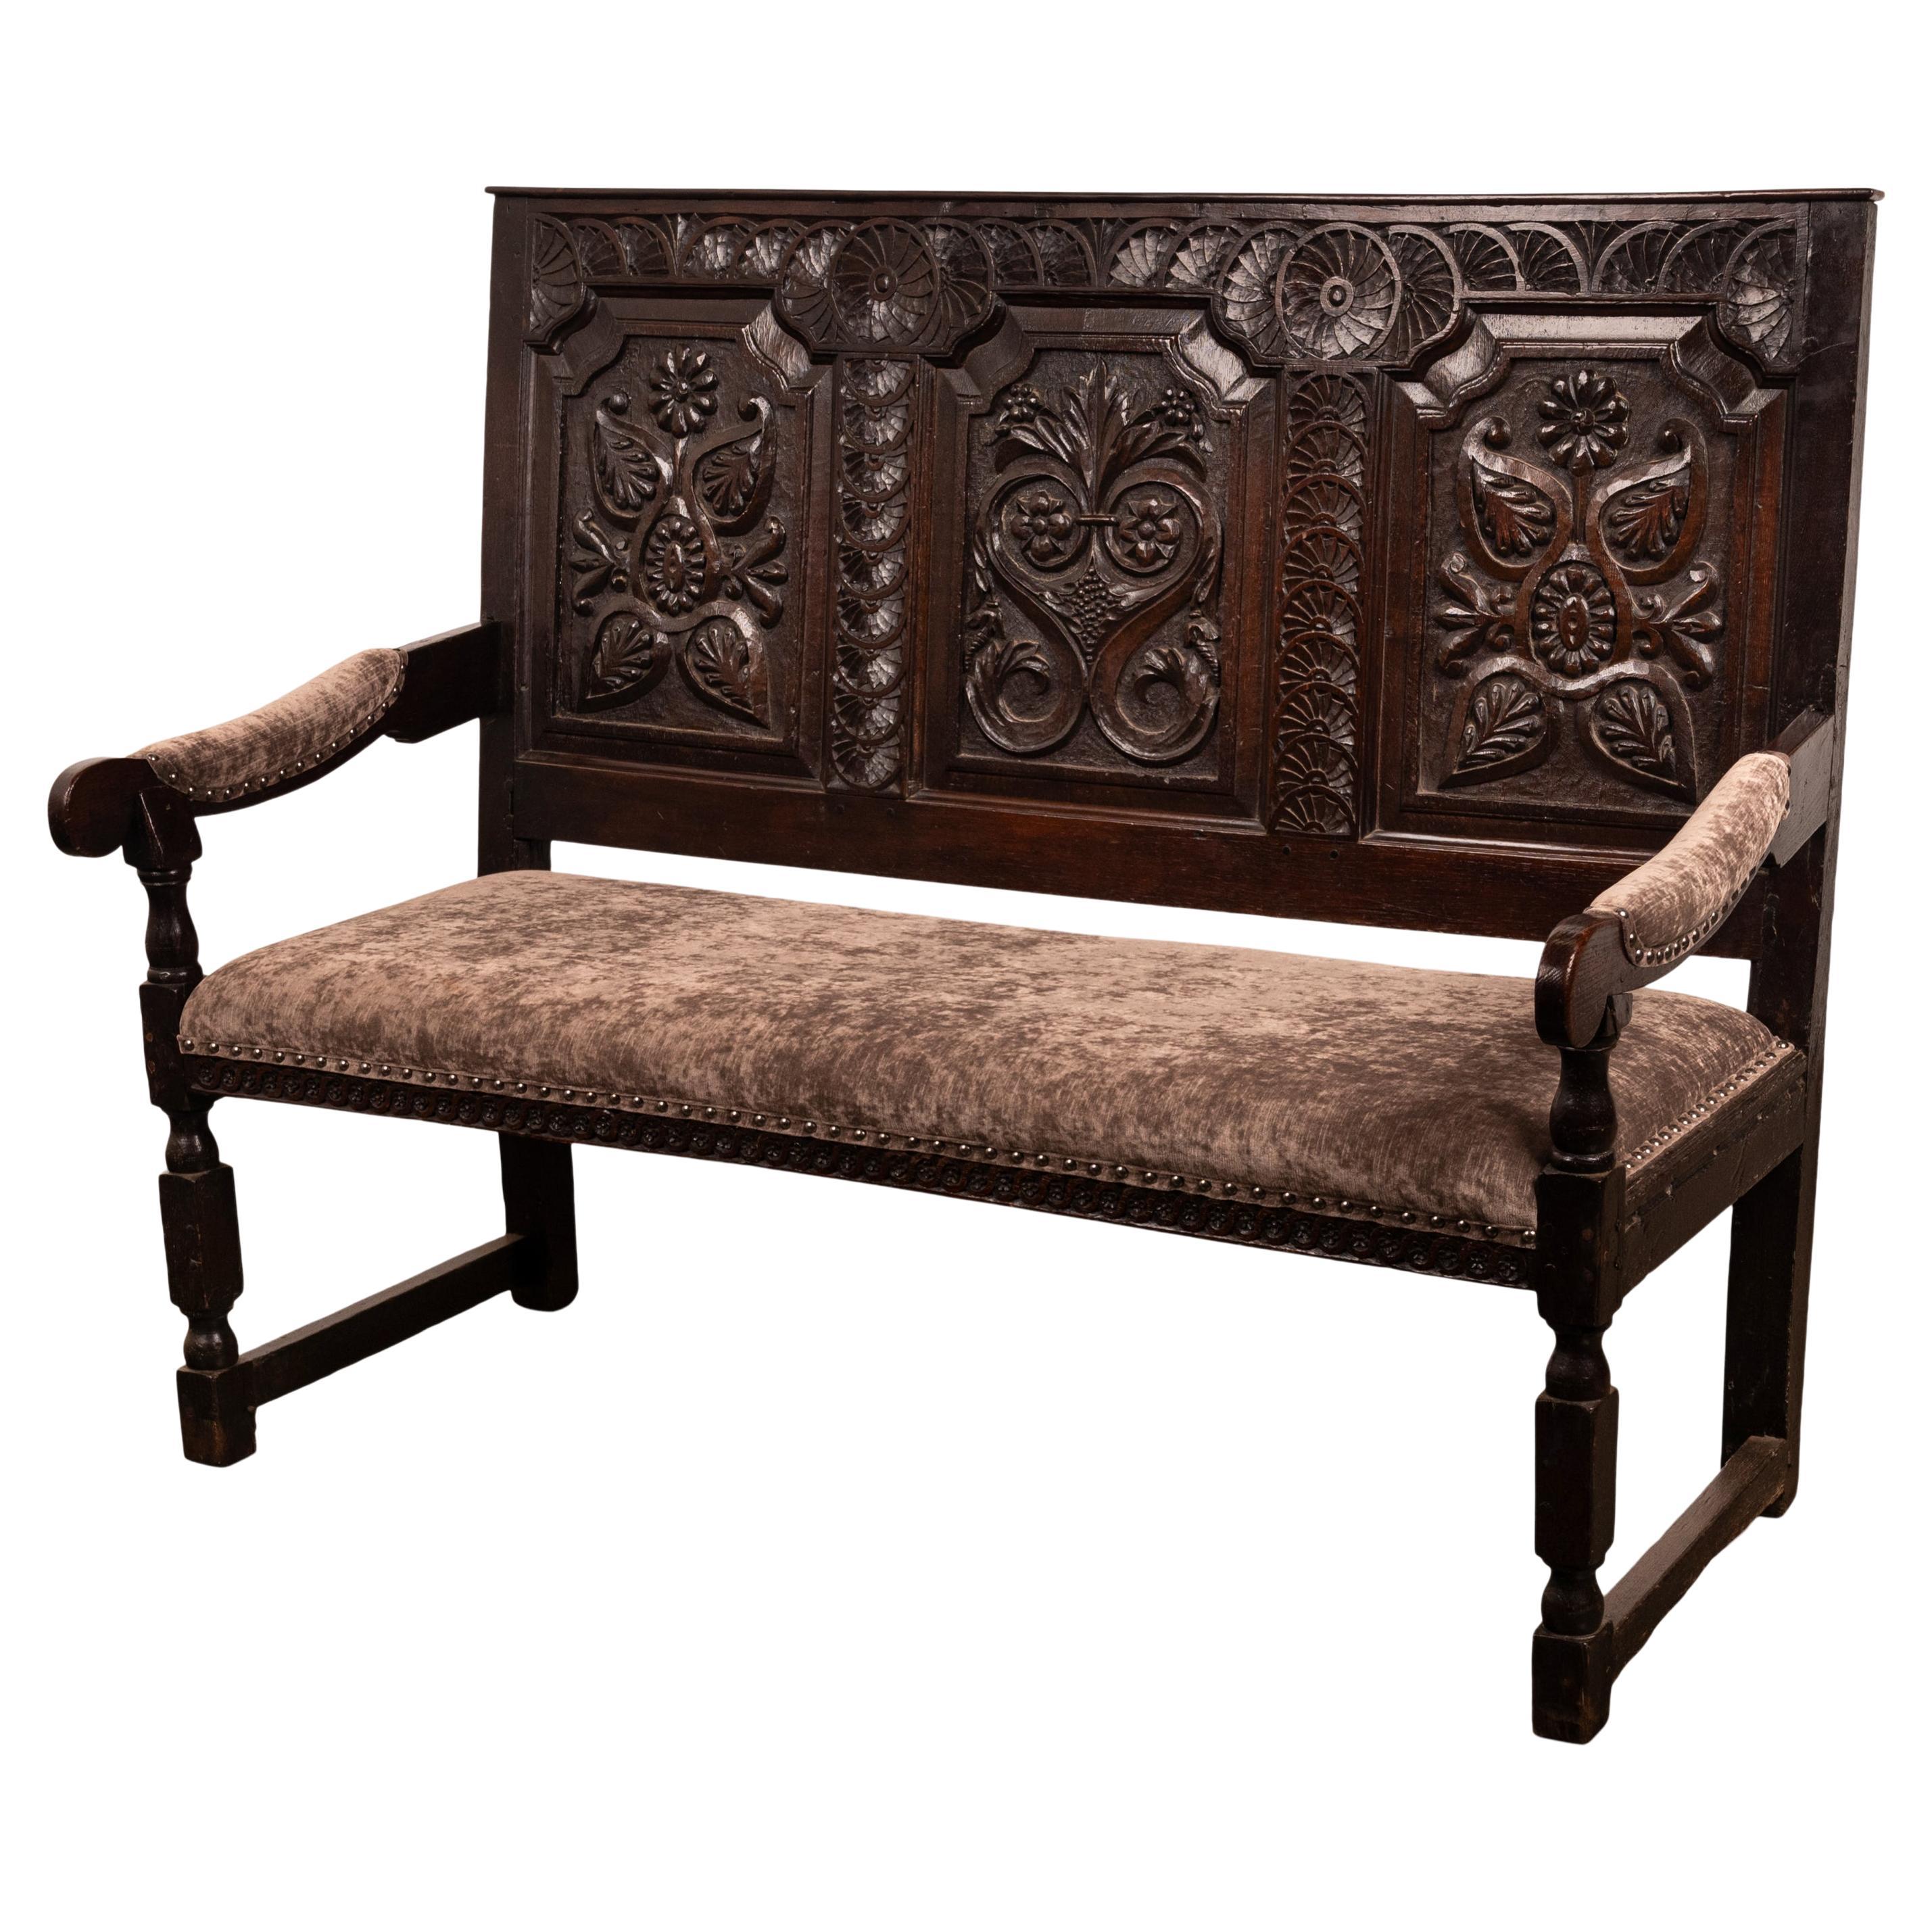 Antique English 17th Century King Charles II Carved Oak Settle Sofa Bench 1680 For Sale